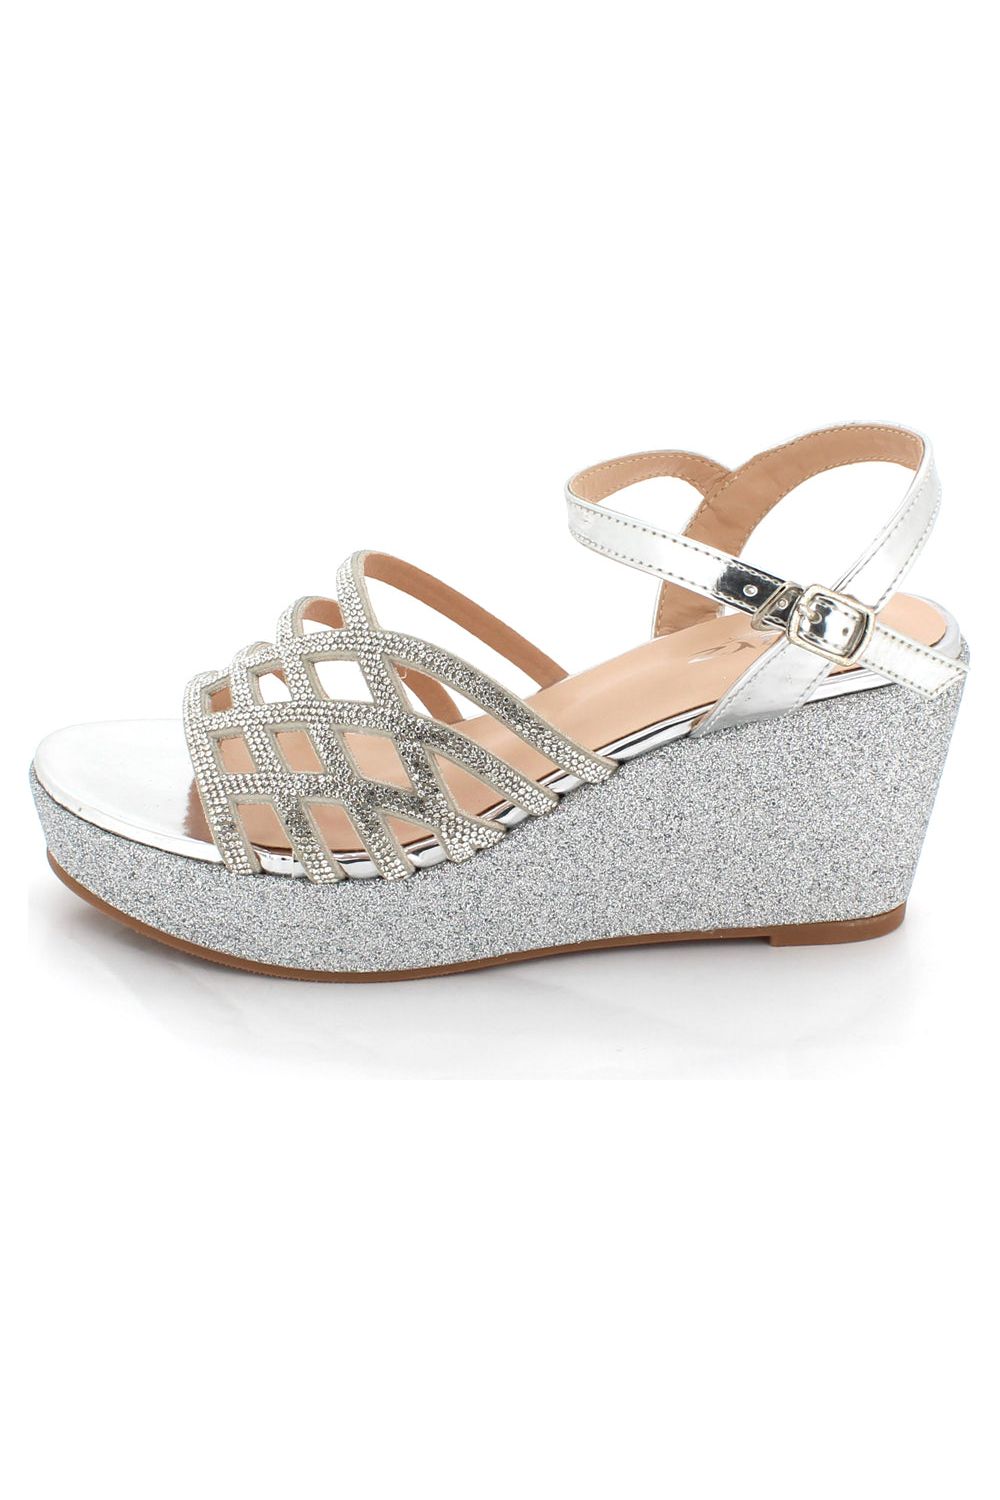 Diamante Evening Party Casual Comfort High Wedge Heel Caged Sandals L8044